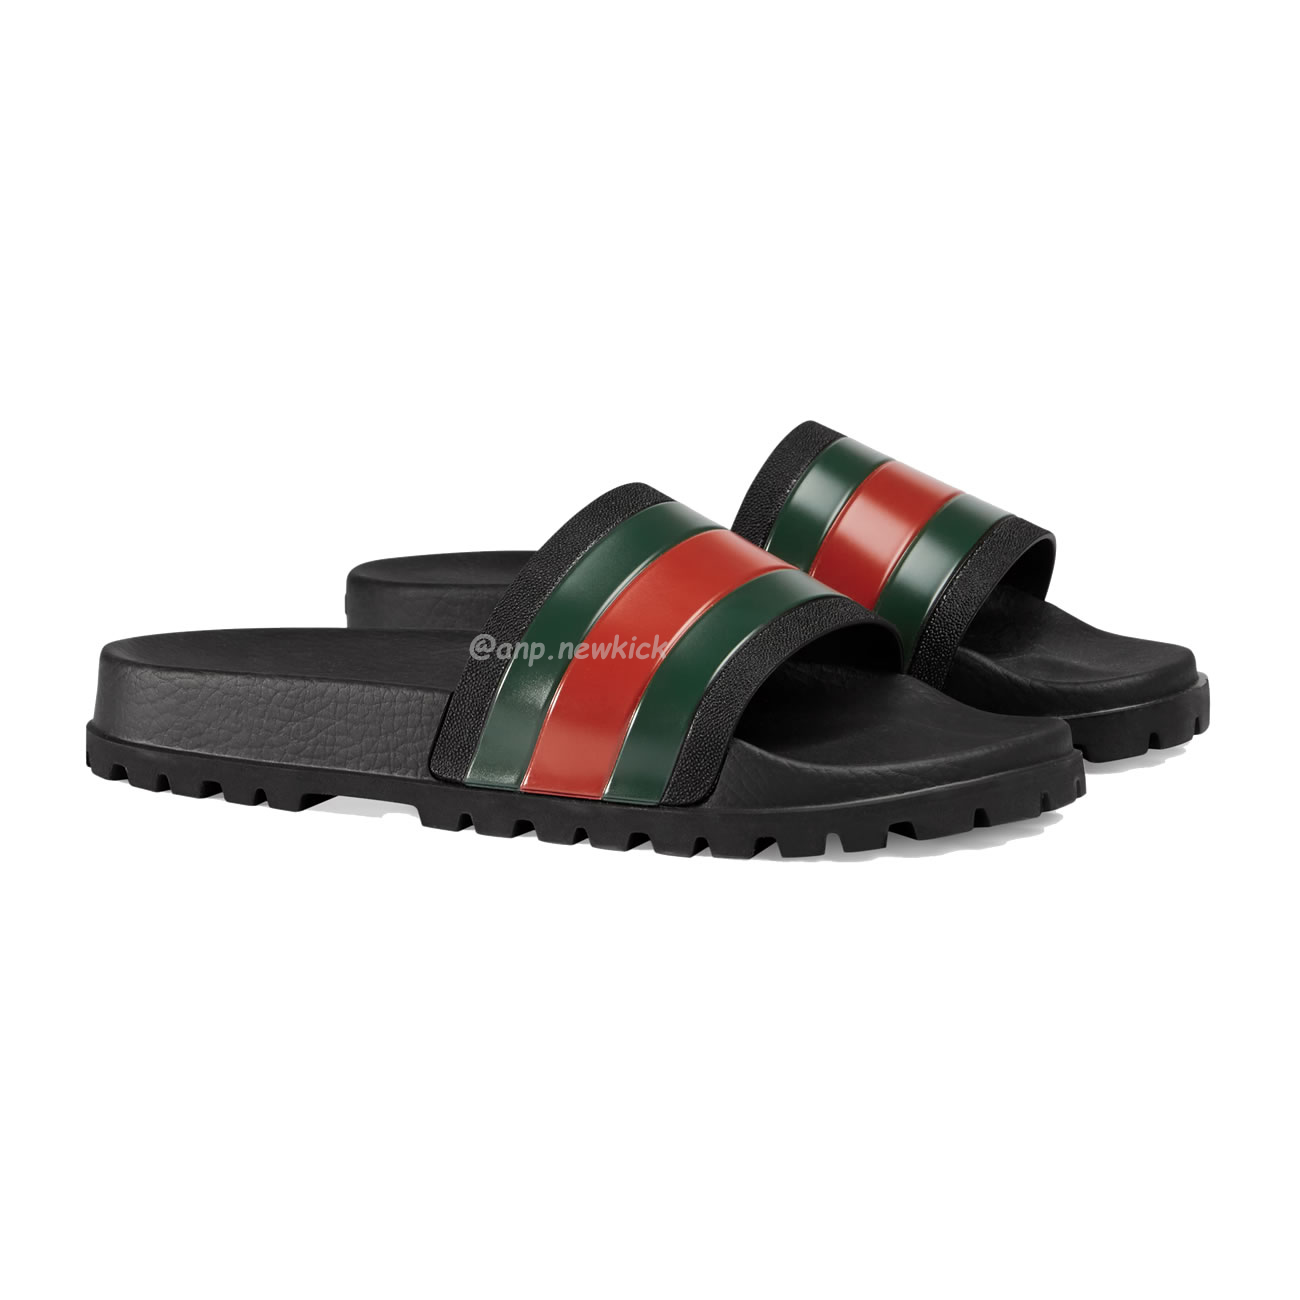 Gucci Mens Woven Leather Sandals 429469 Gib10 1098 (6) - newkick.org